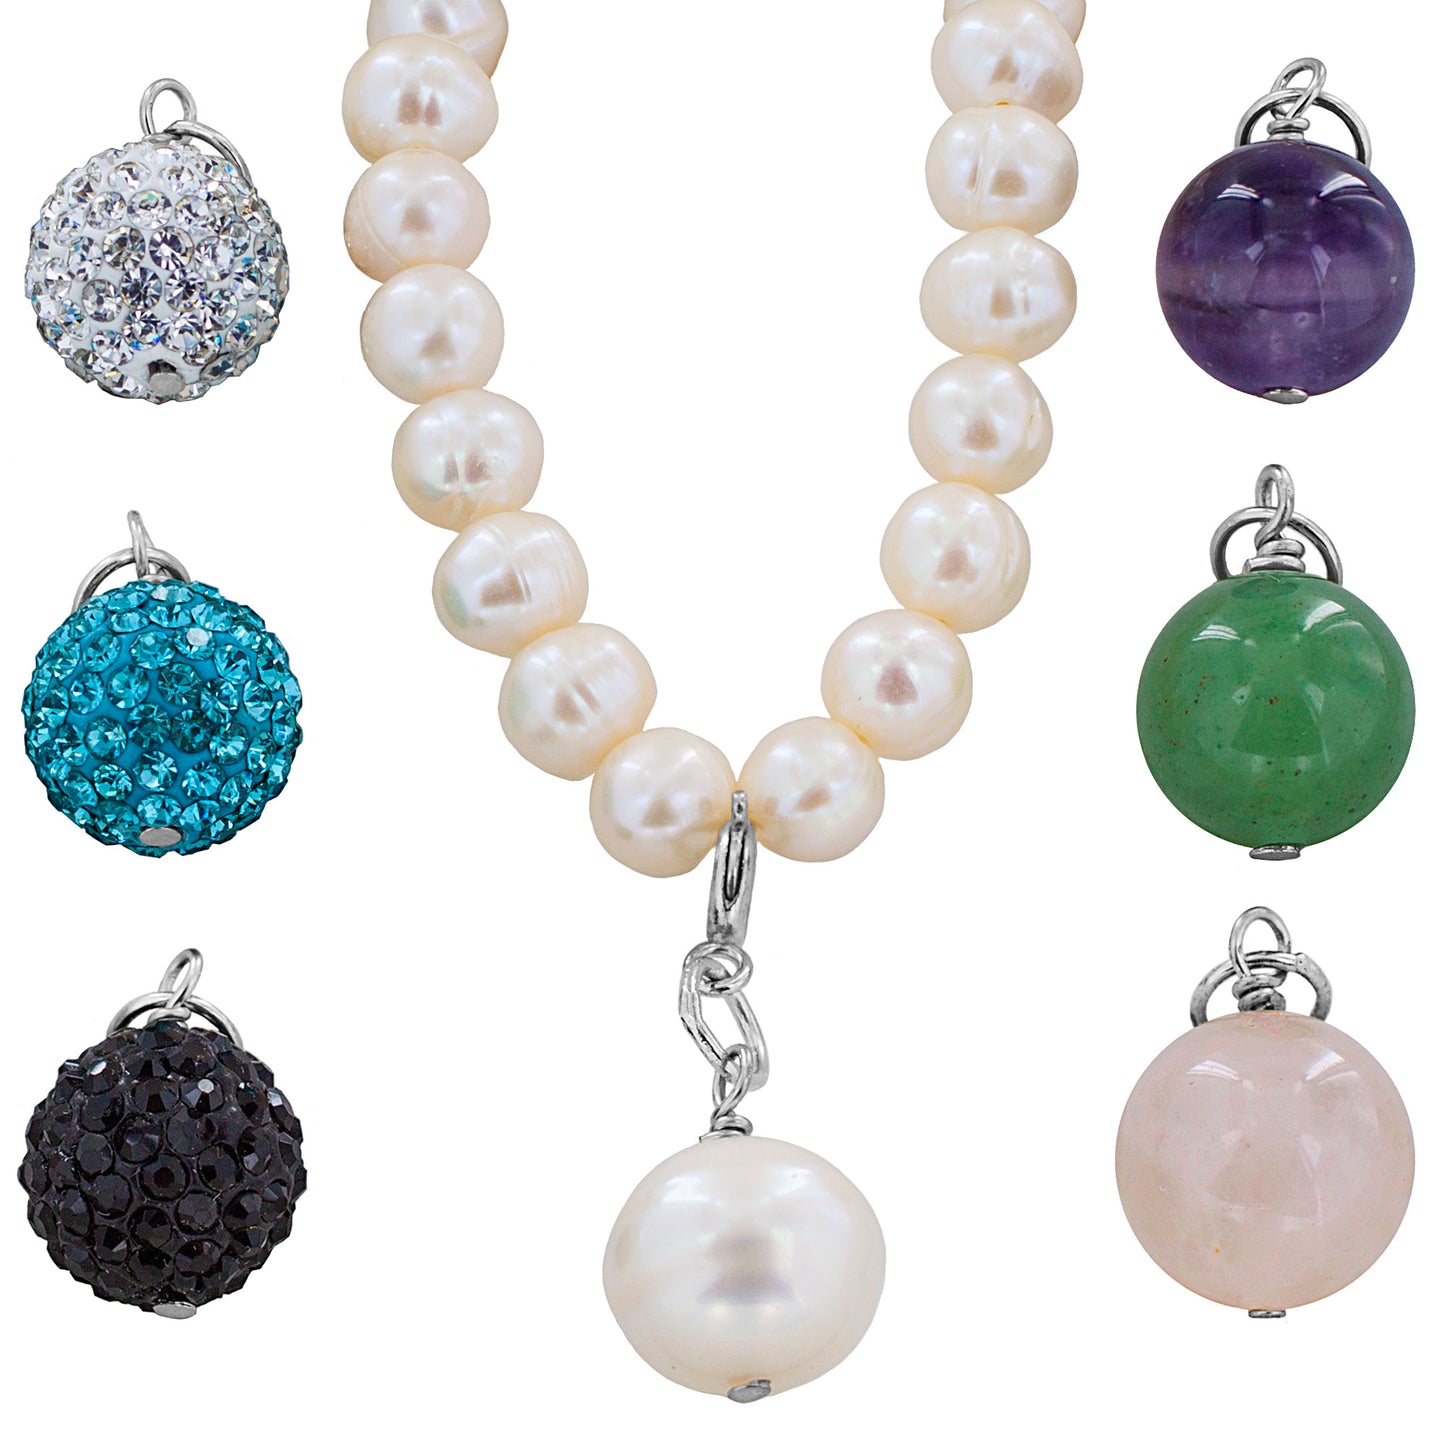 Pearl and Crystal Charm Interchangeable Bracelet Set